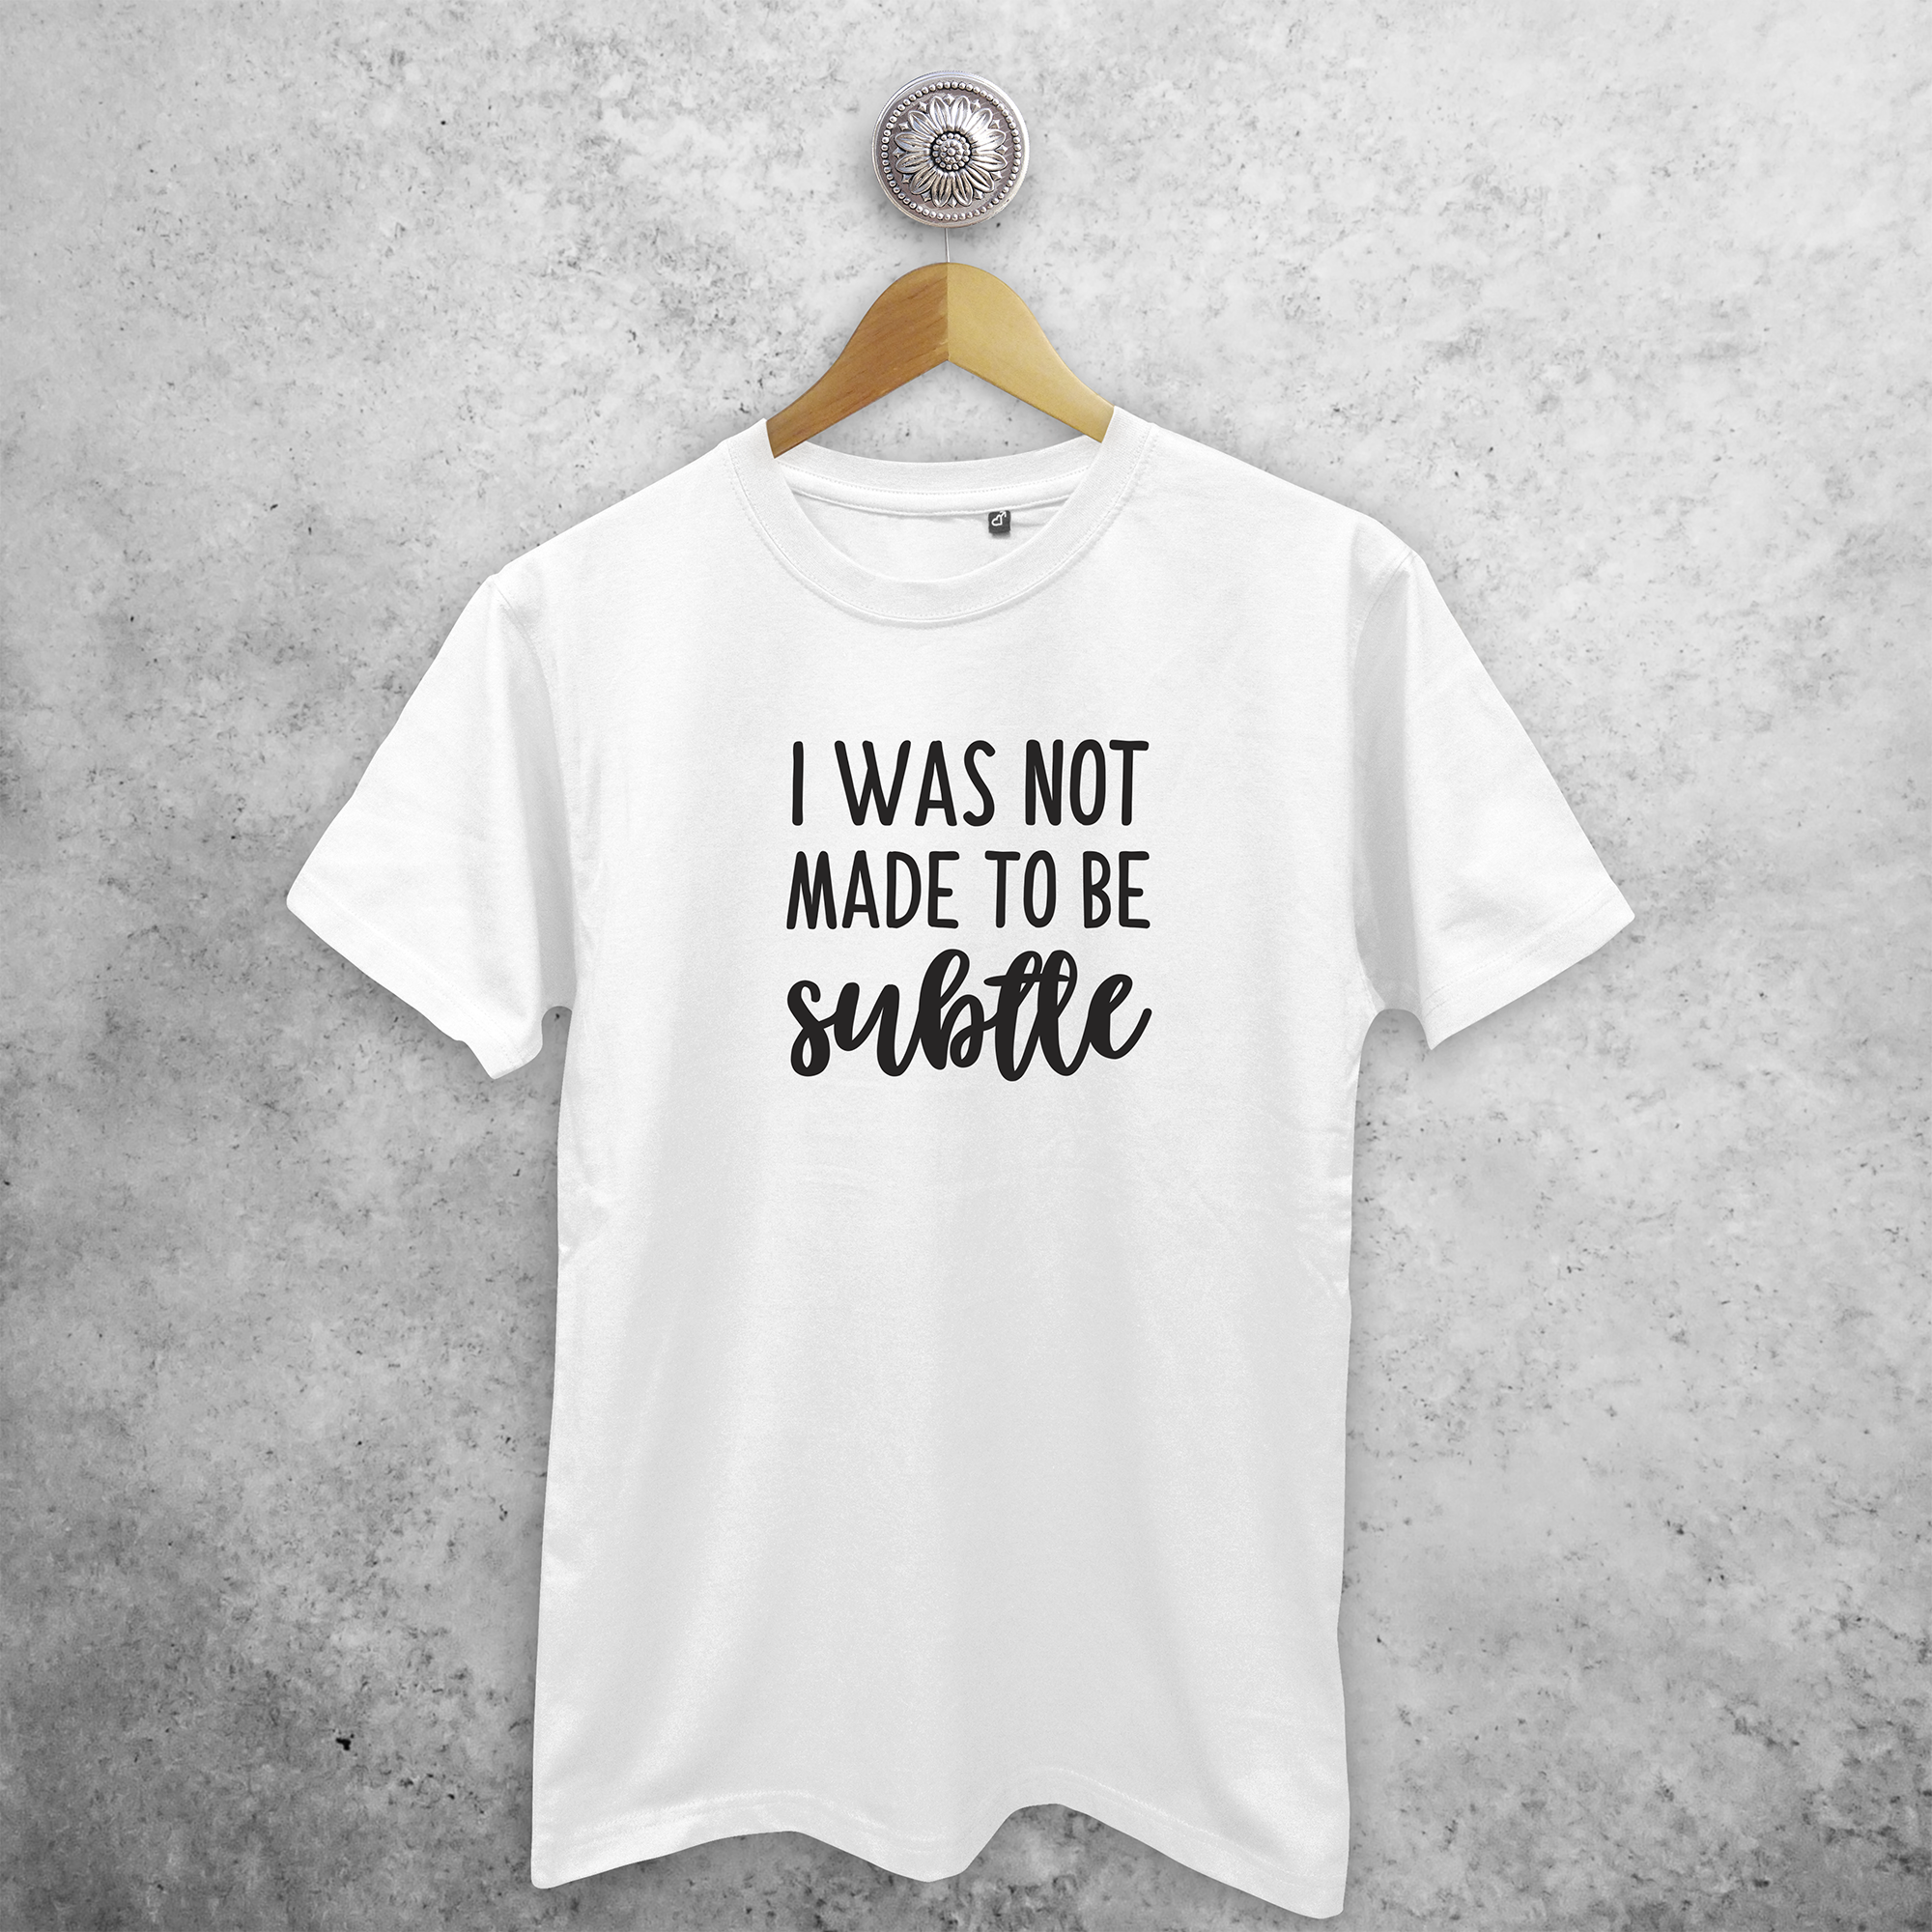 'I was not made to be subtle' volwassene shirt